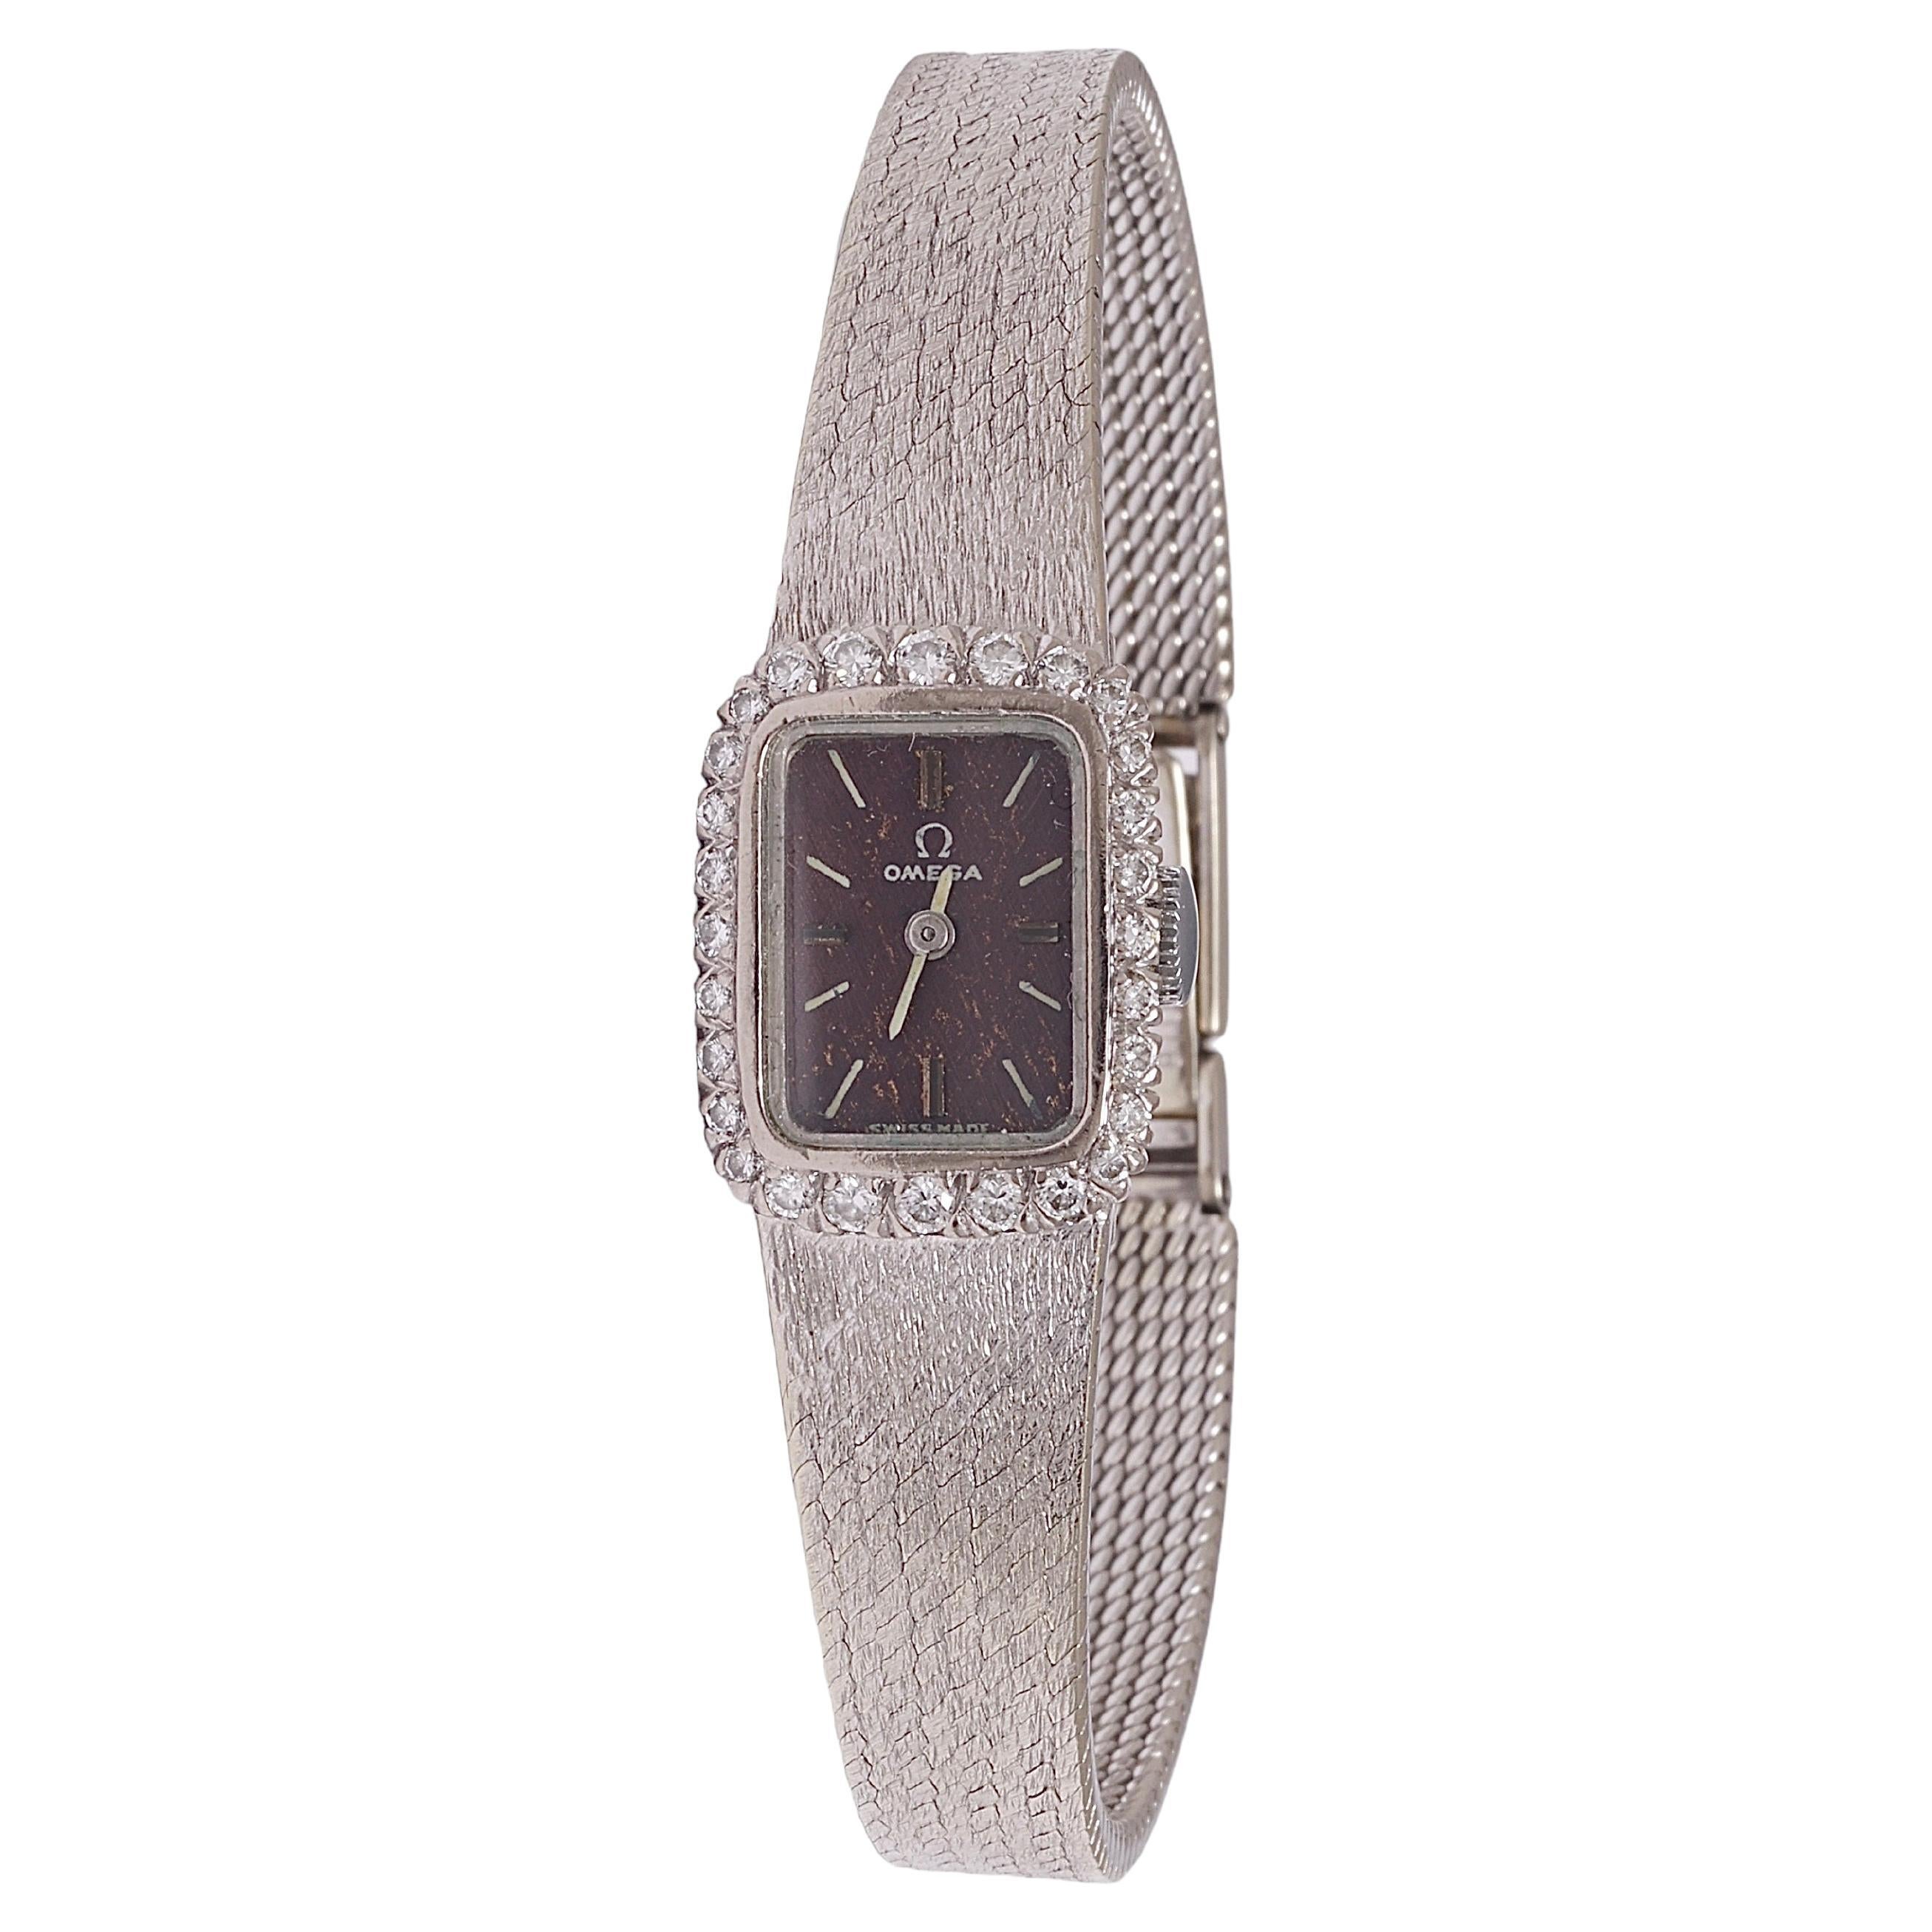 Vintage 18 kt. White Gold Omega With Diamond Ladies Dress Cocktail Watch For Sale